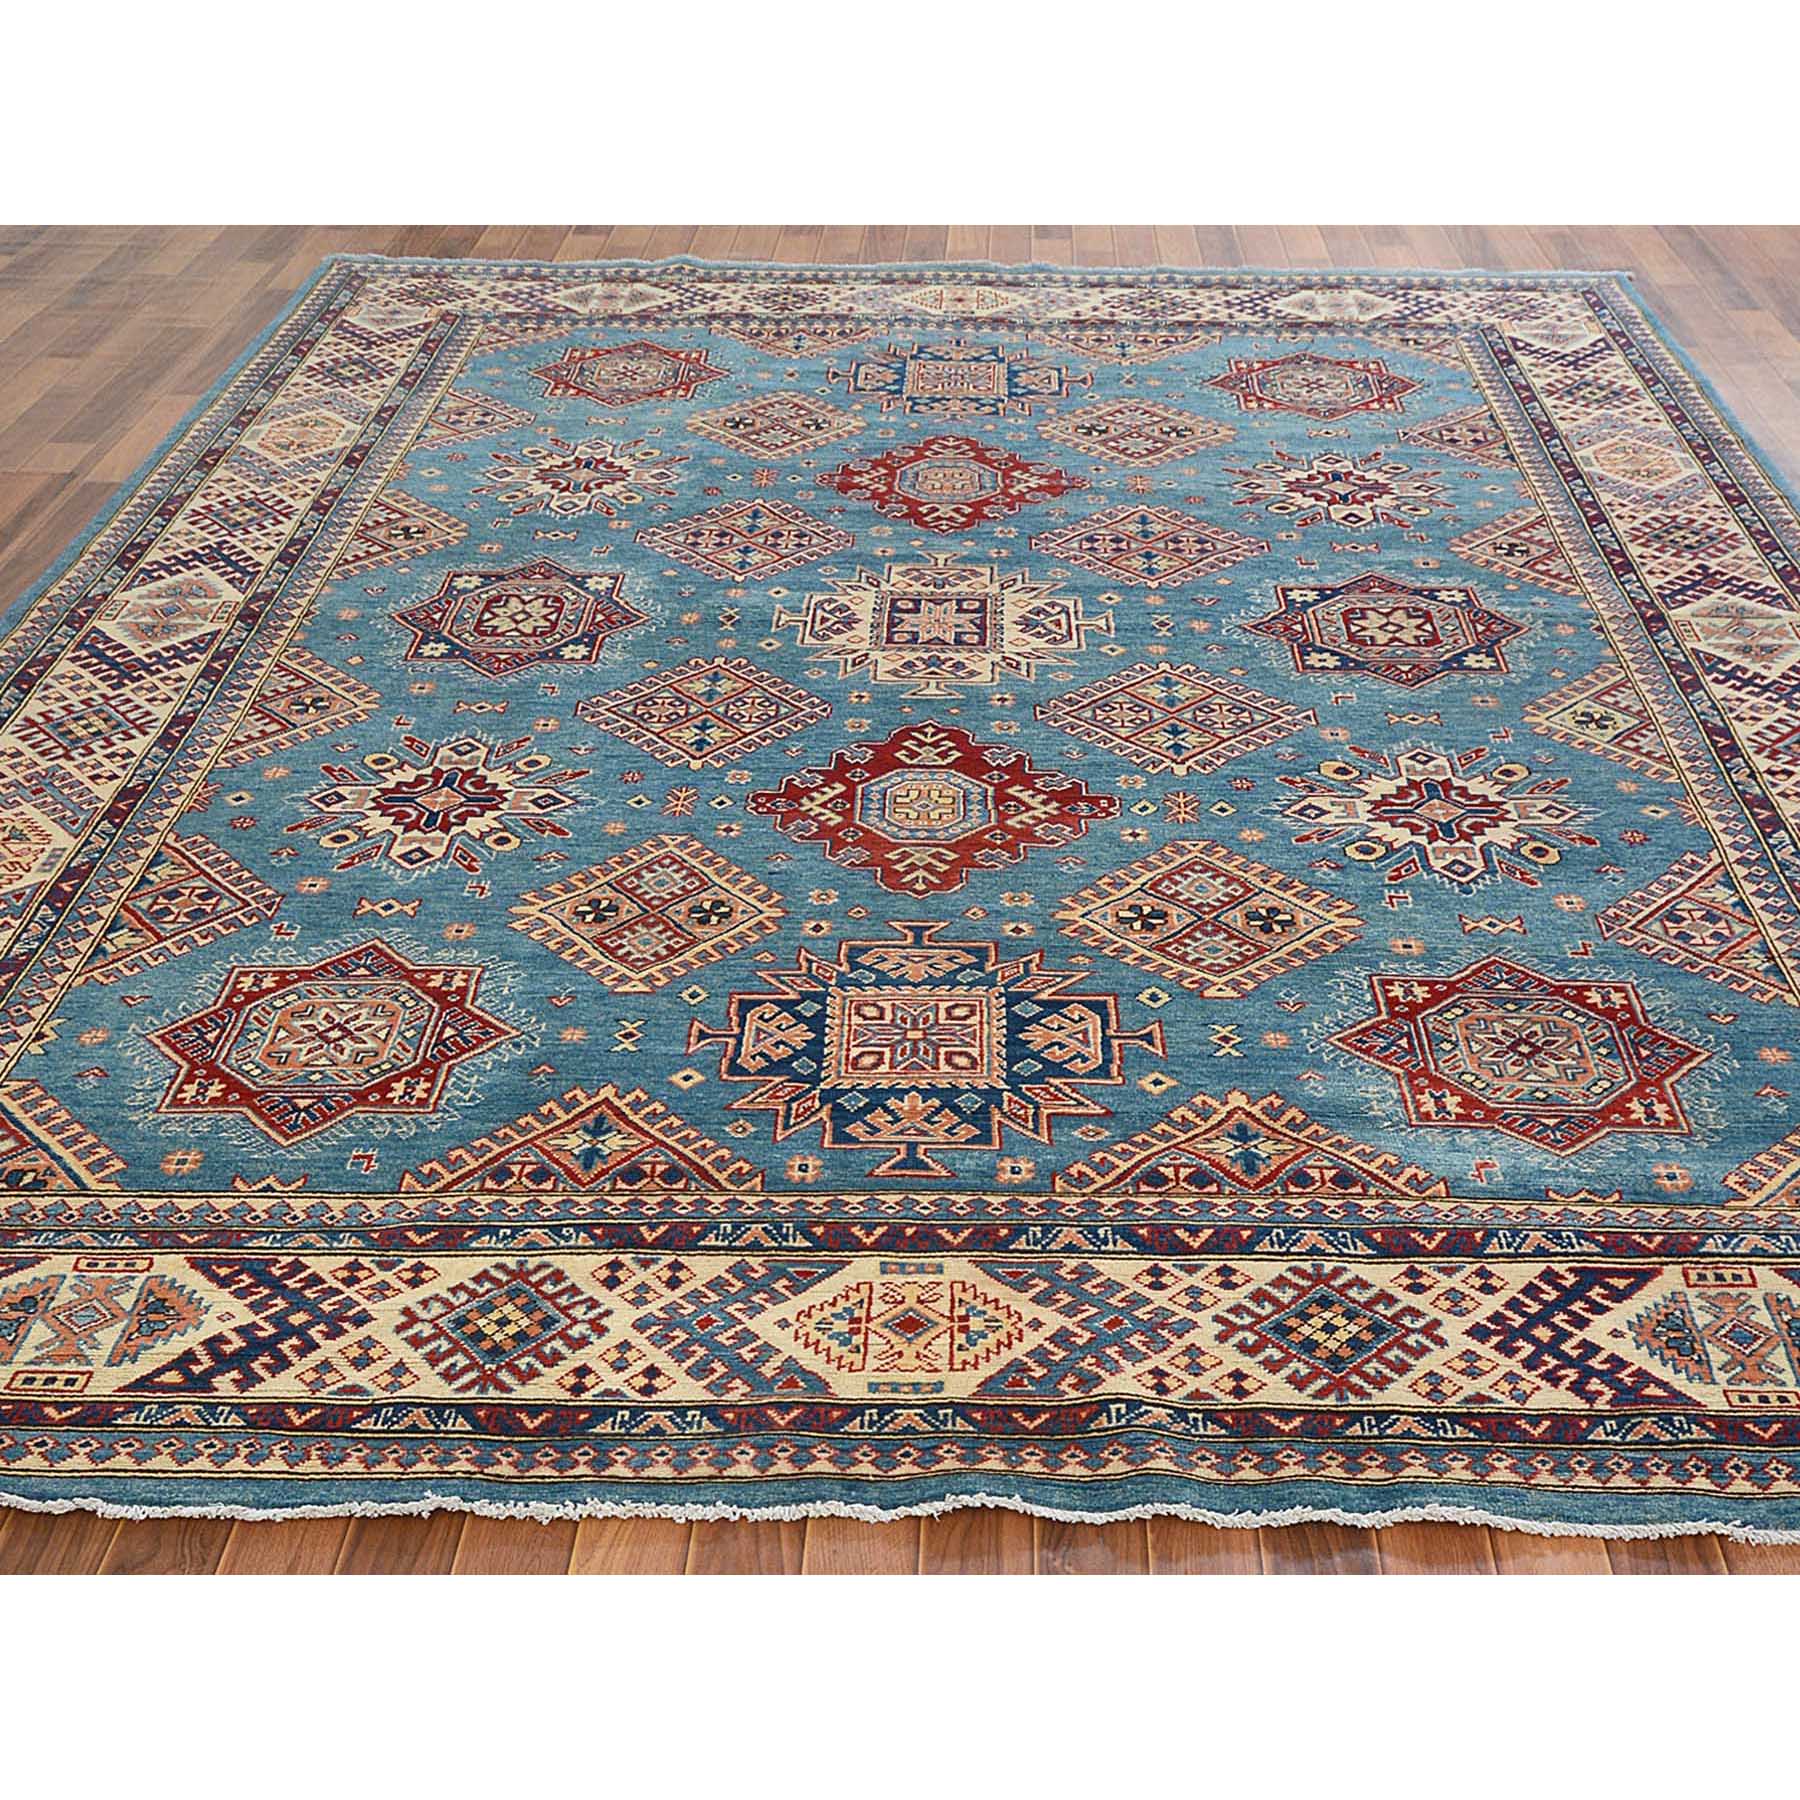 9-1 x11-5  Blue Special Kazak Geometric Design Pure Wool Hand Knotted Oriental Rug 